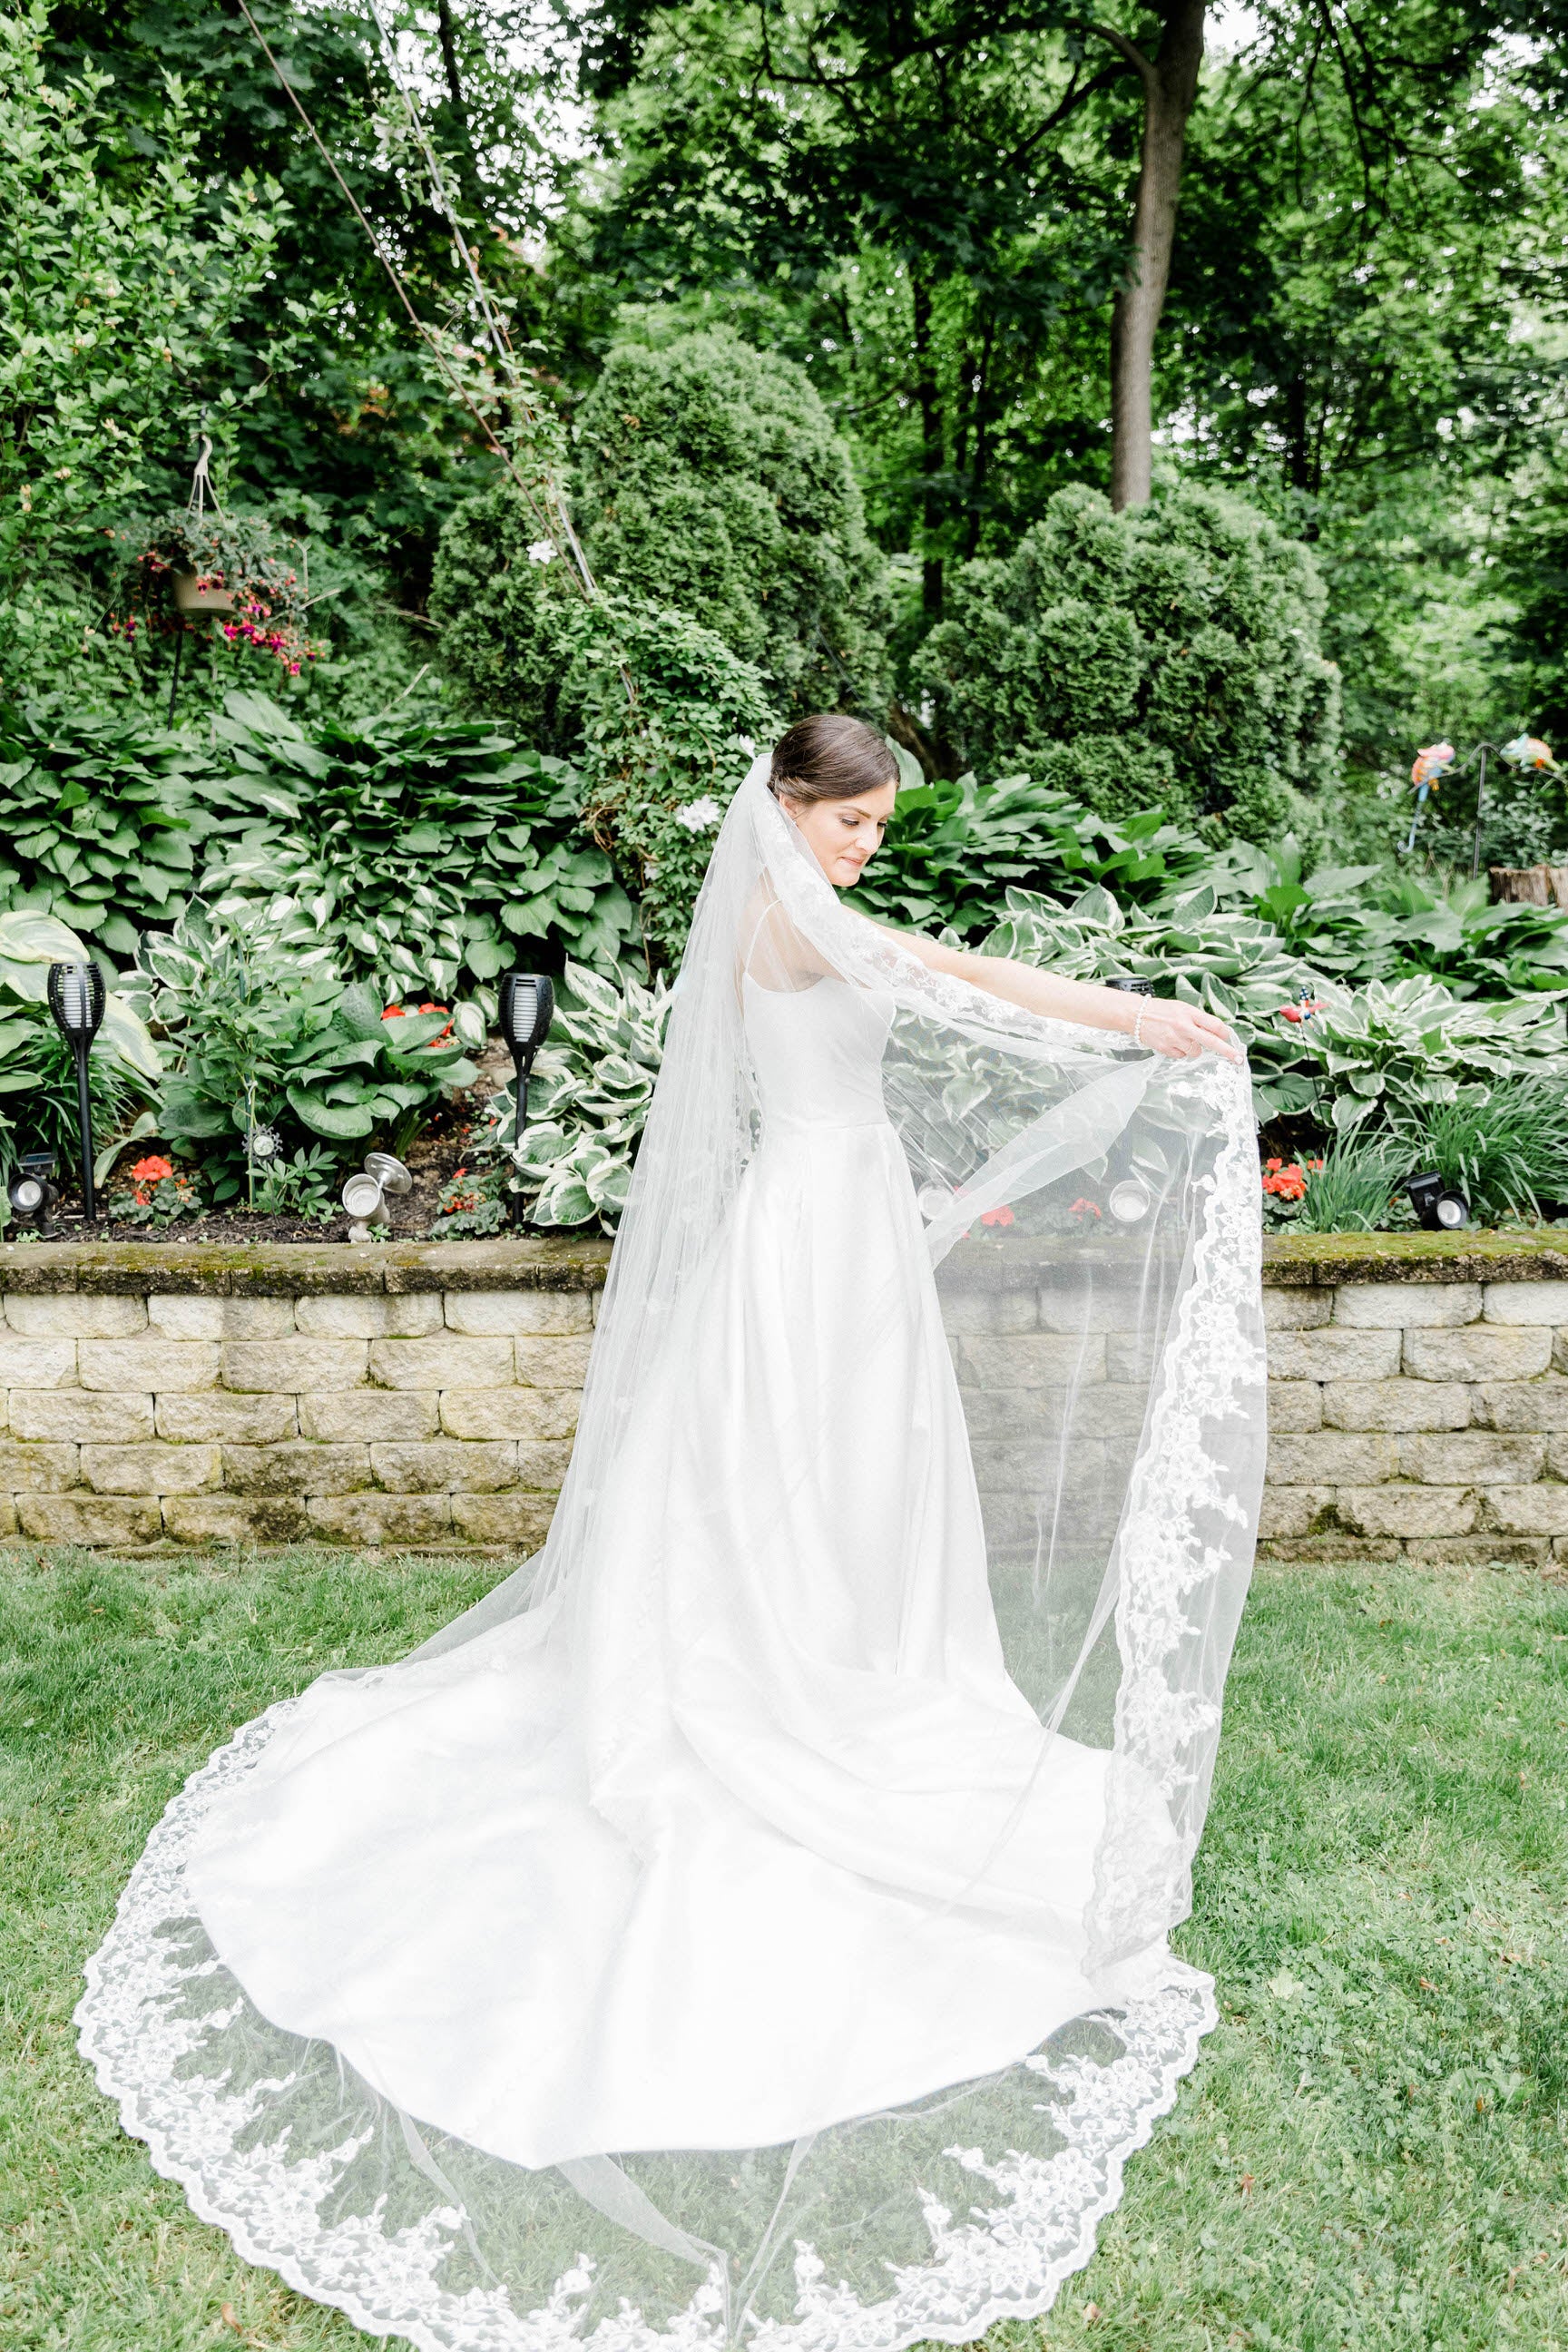 Long Lace Wedding Veil Long White Cathedral Style Bridal Veil With